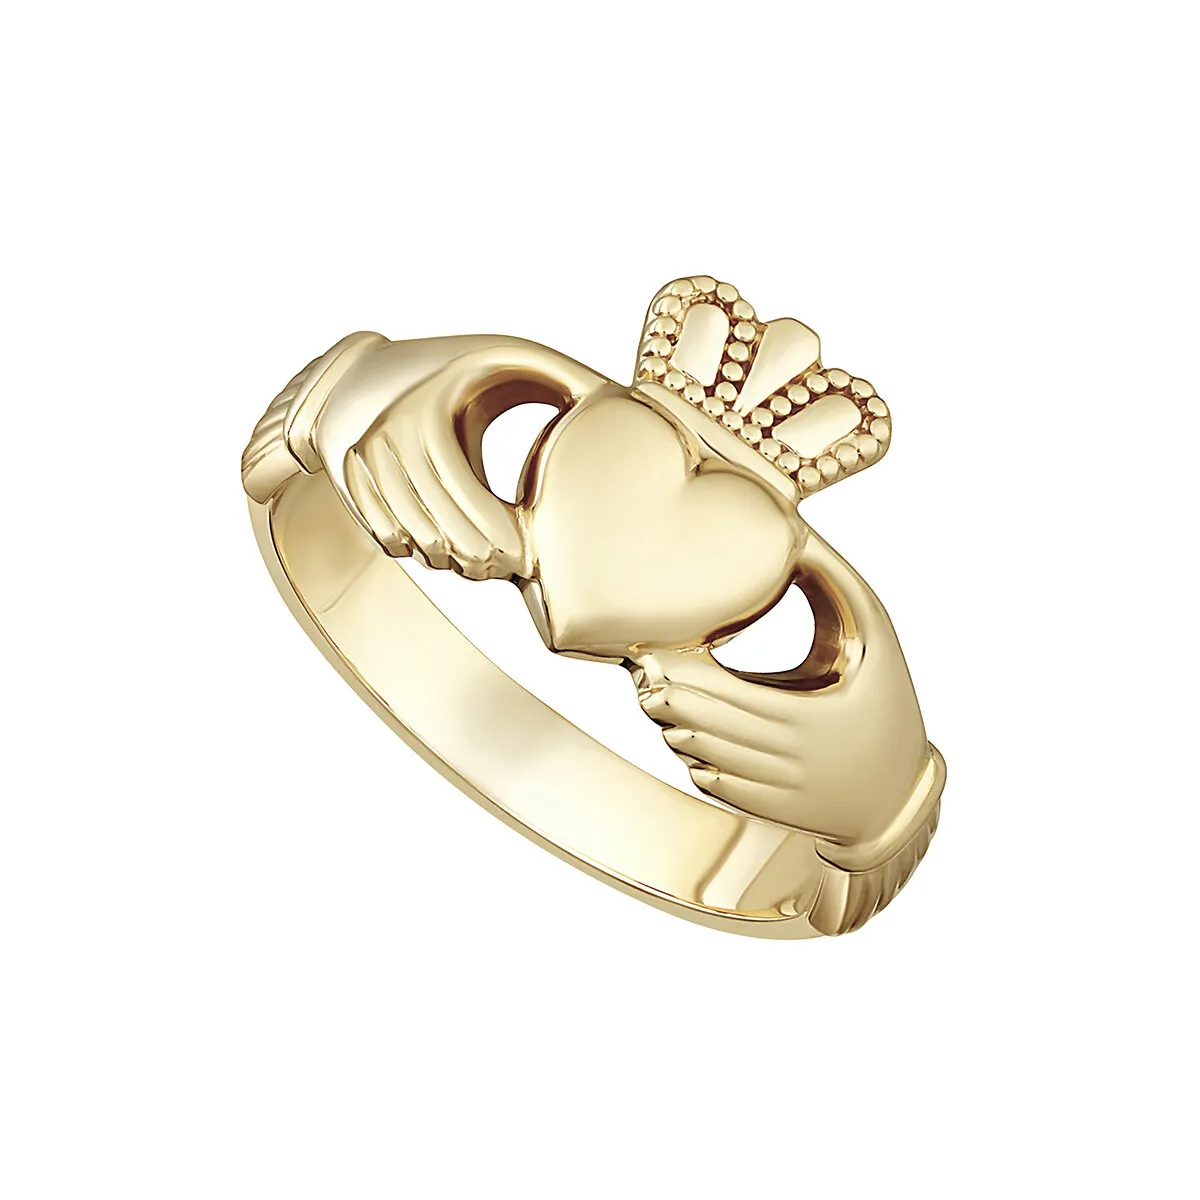 9K Gold Heavy Maids Claddagh Ring...